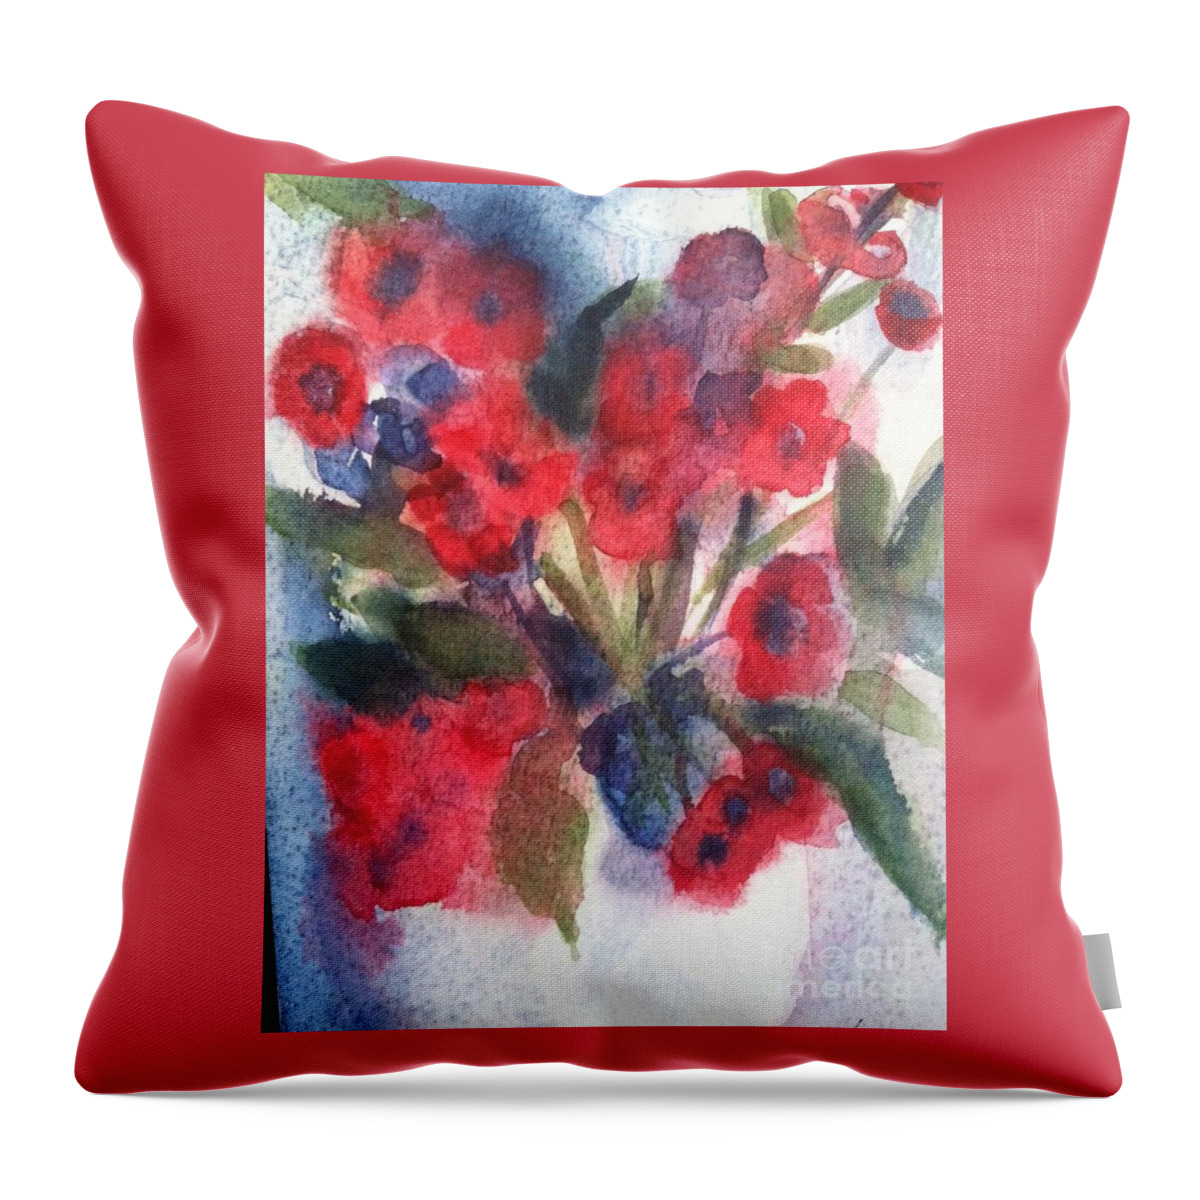 Orchards Throw Pillow featuring the painting Faded Memories by Sherry Harradence